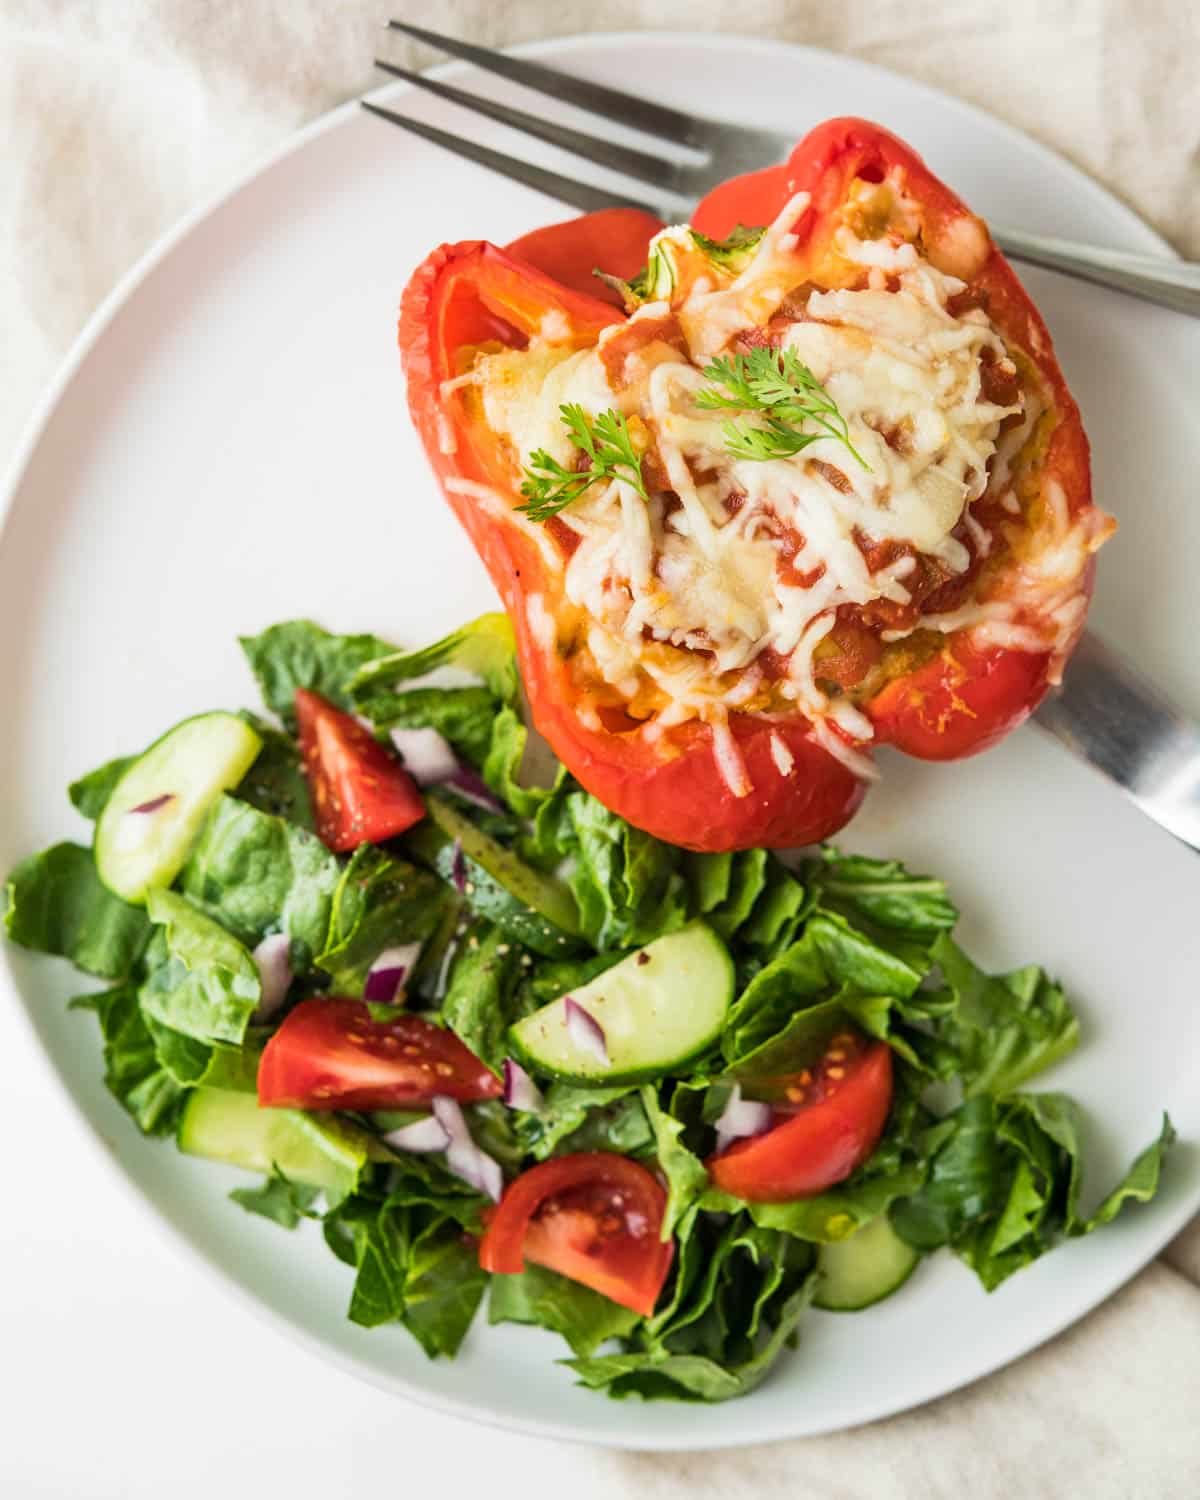 Stuffed red bell pepper with a side salad.